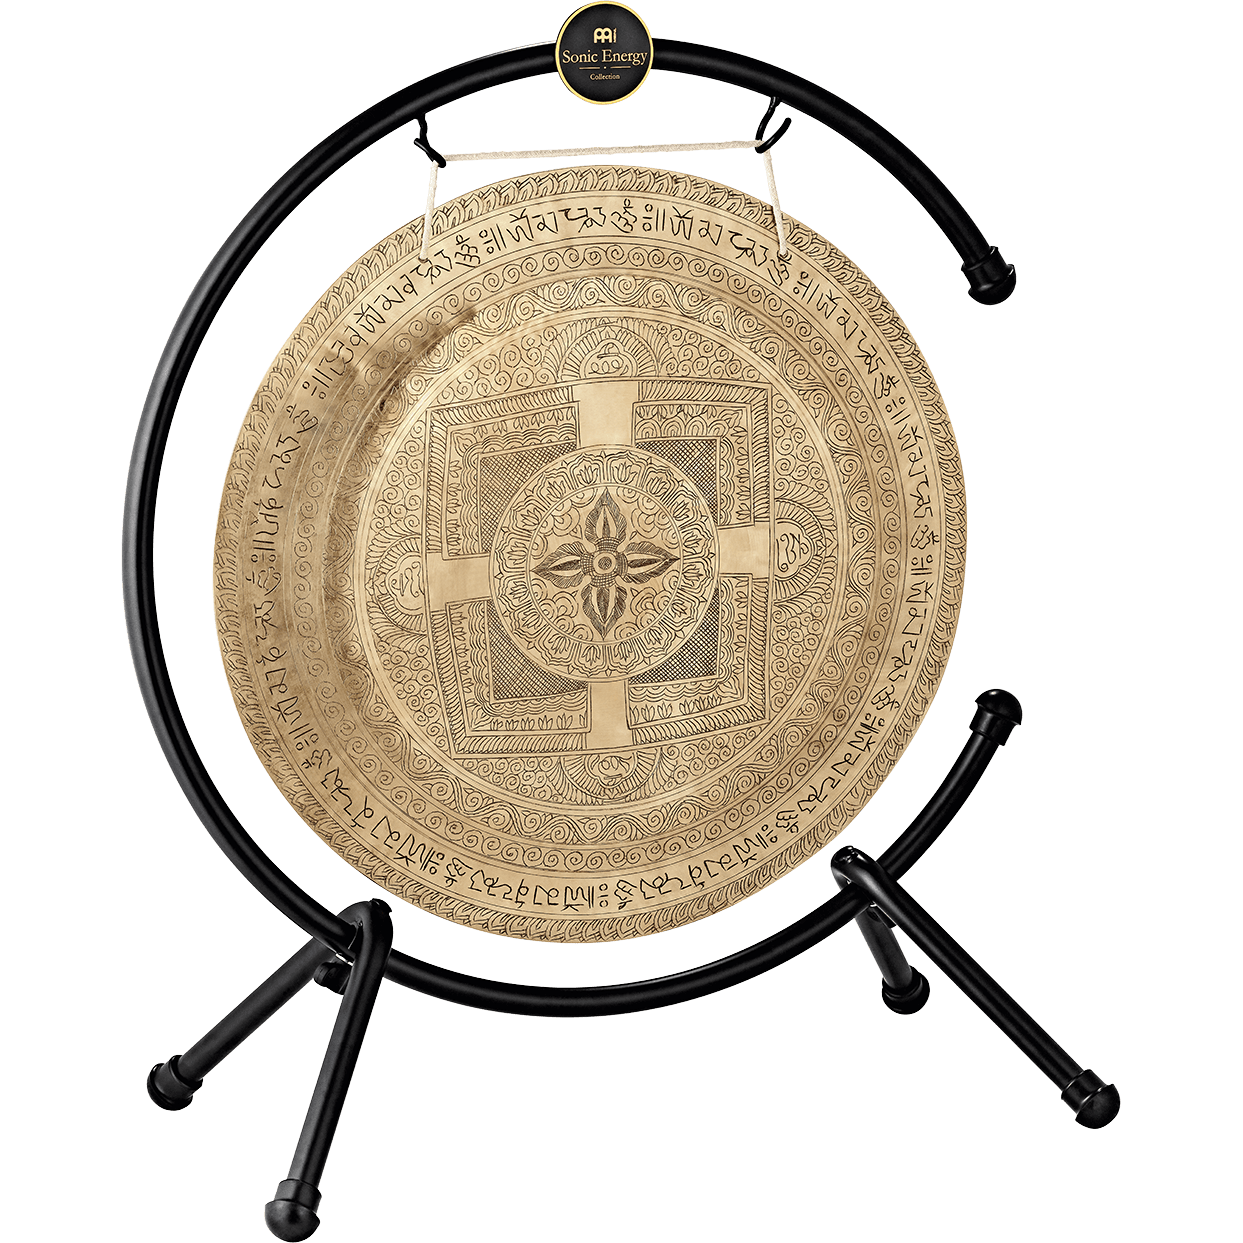 22" Premium Indian Wind Gong Hand Engraved Mantras - Indian Premium Wind Gong